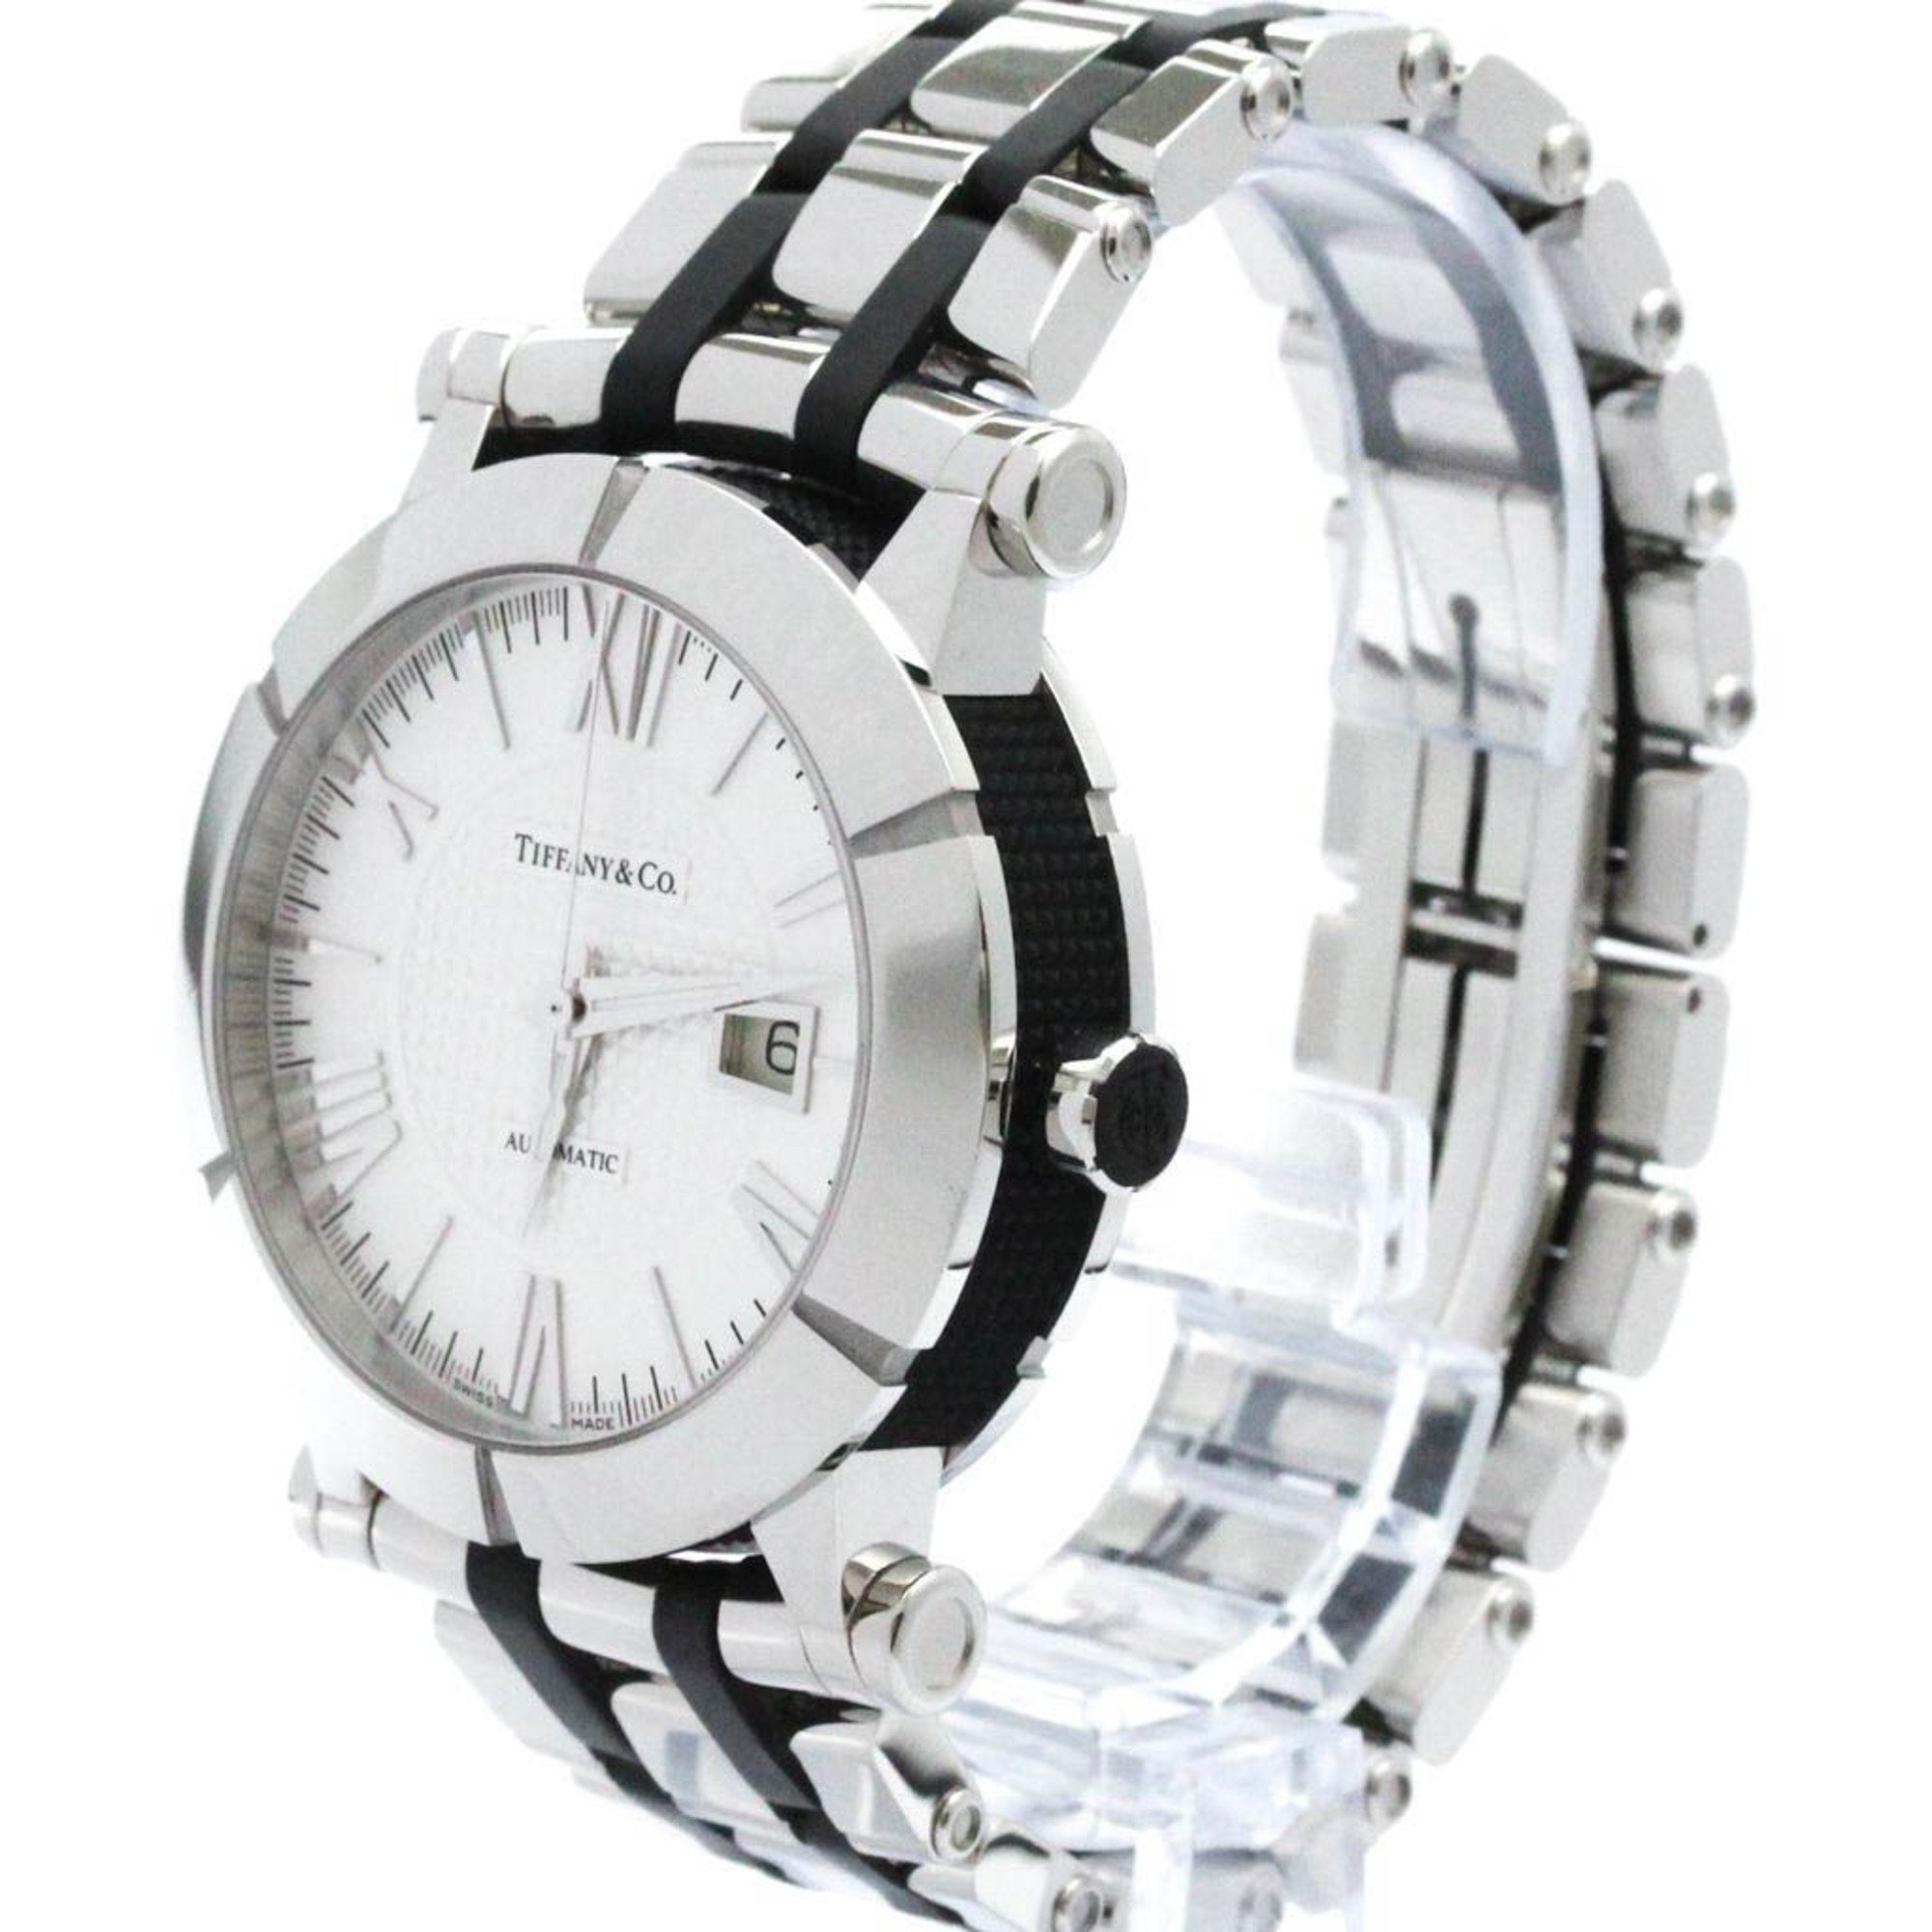 Polished TIFFANY Atlas Steel Rubber Automatic Watch Z1000.70.12A10A00A BF571251